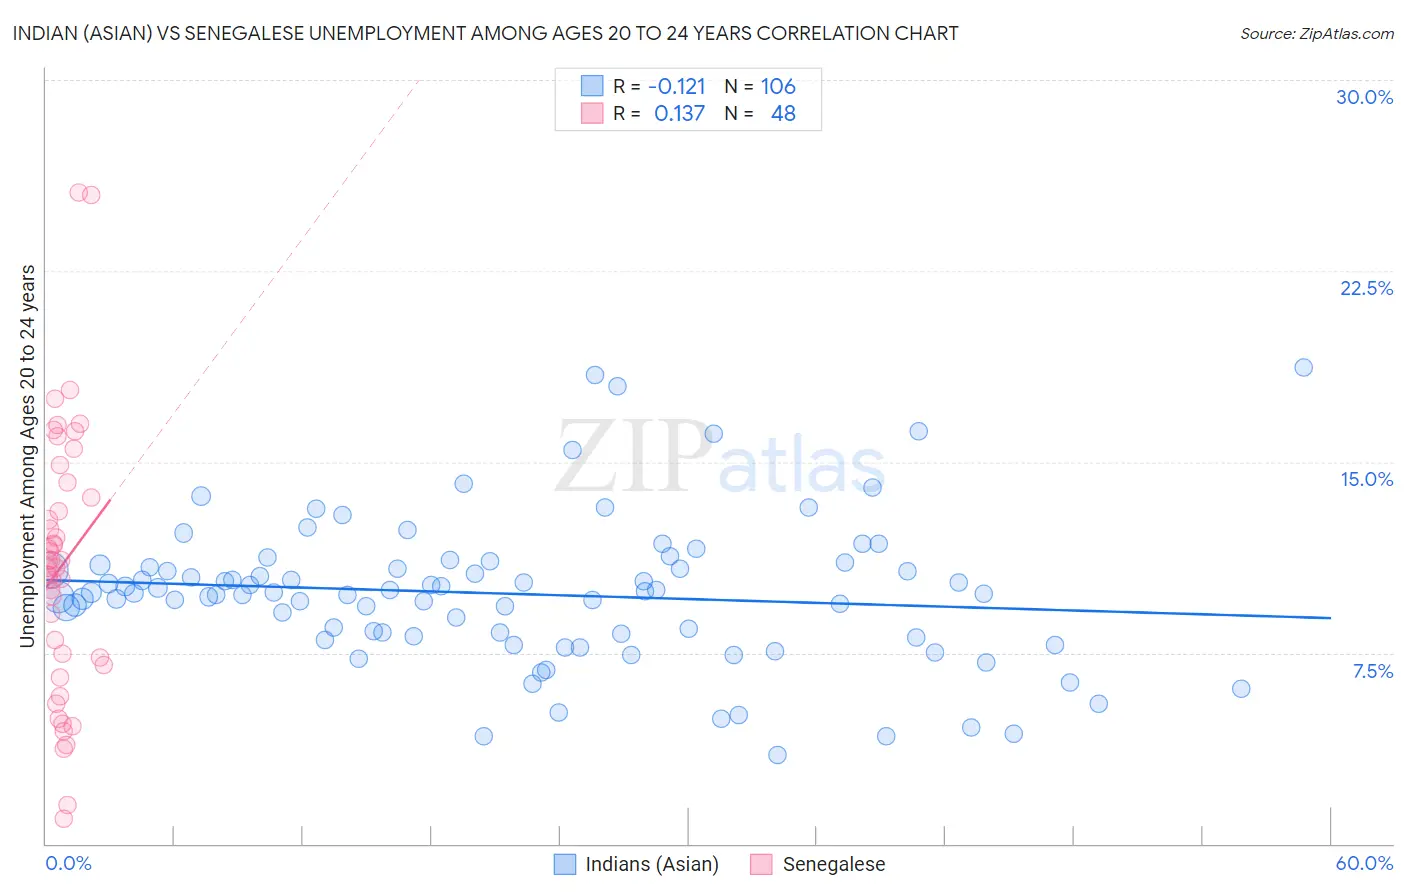 Indian (Asian) vs Senegalese Unemployment Among Ages 20 to 24 years